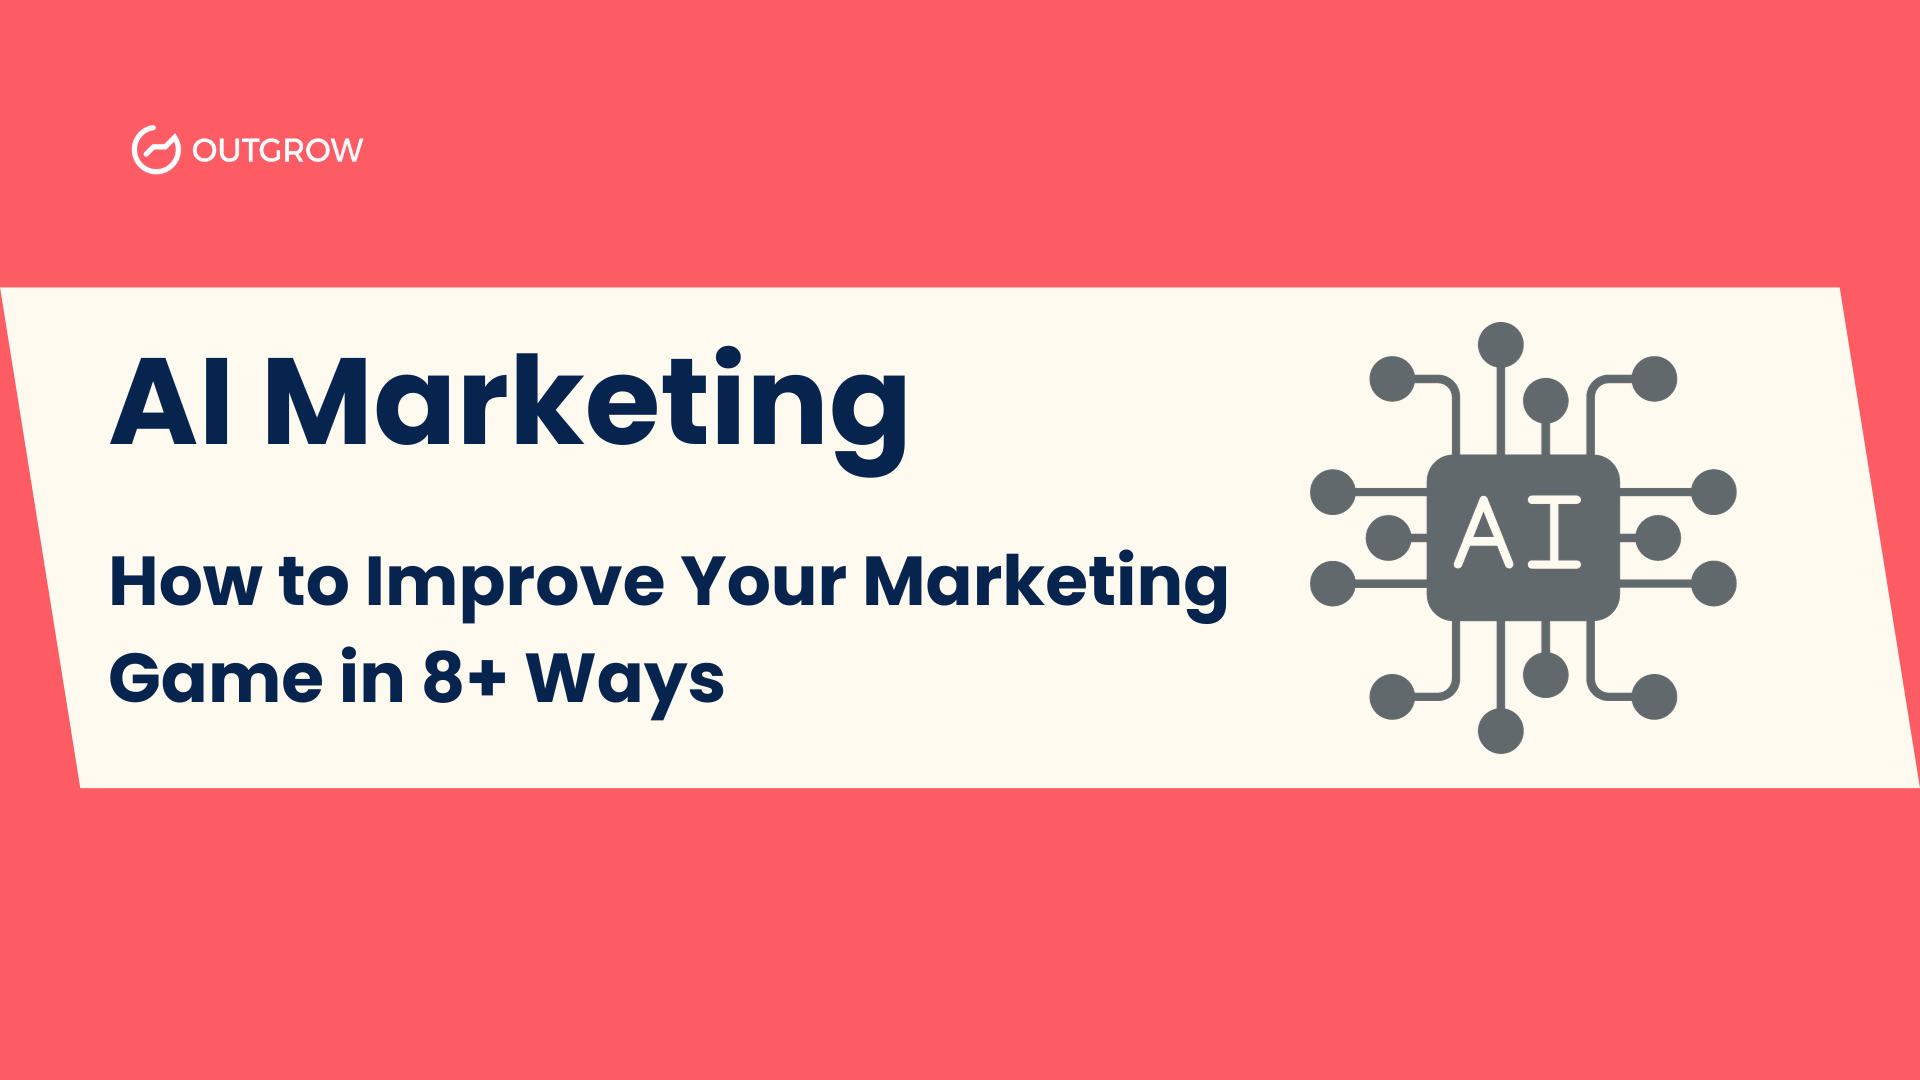 AI Marketing: How to Improve Your Marketing Game in 8+ Ways